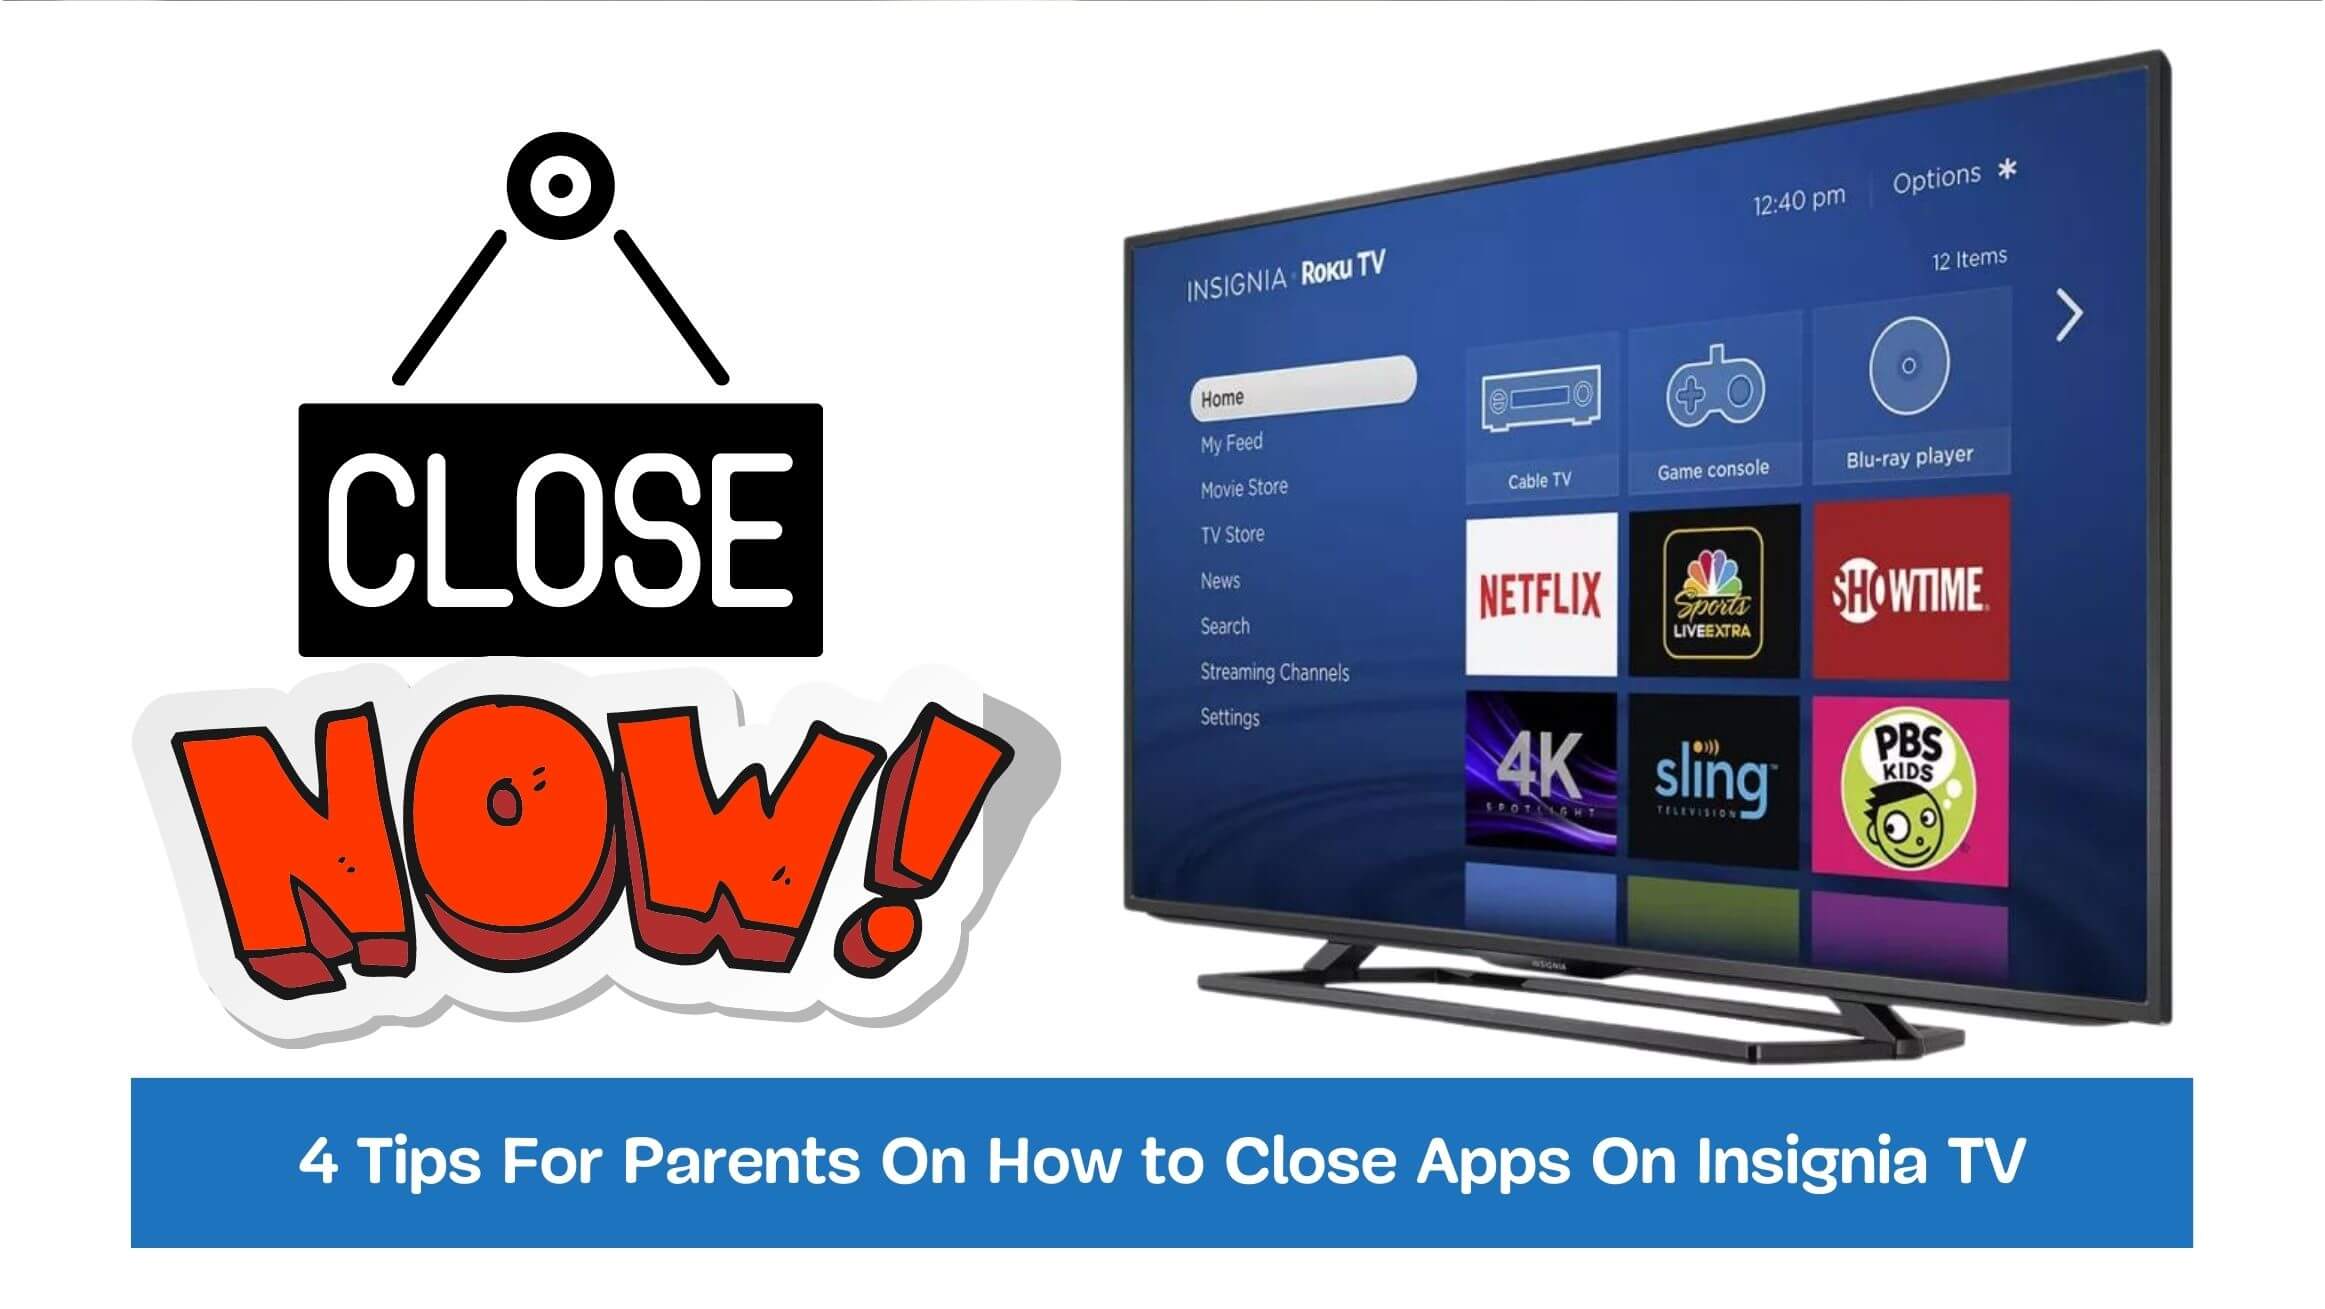 4 Tips For Parents On How to Close Apps On Insignia TV